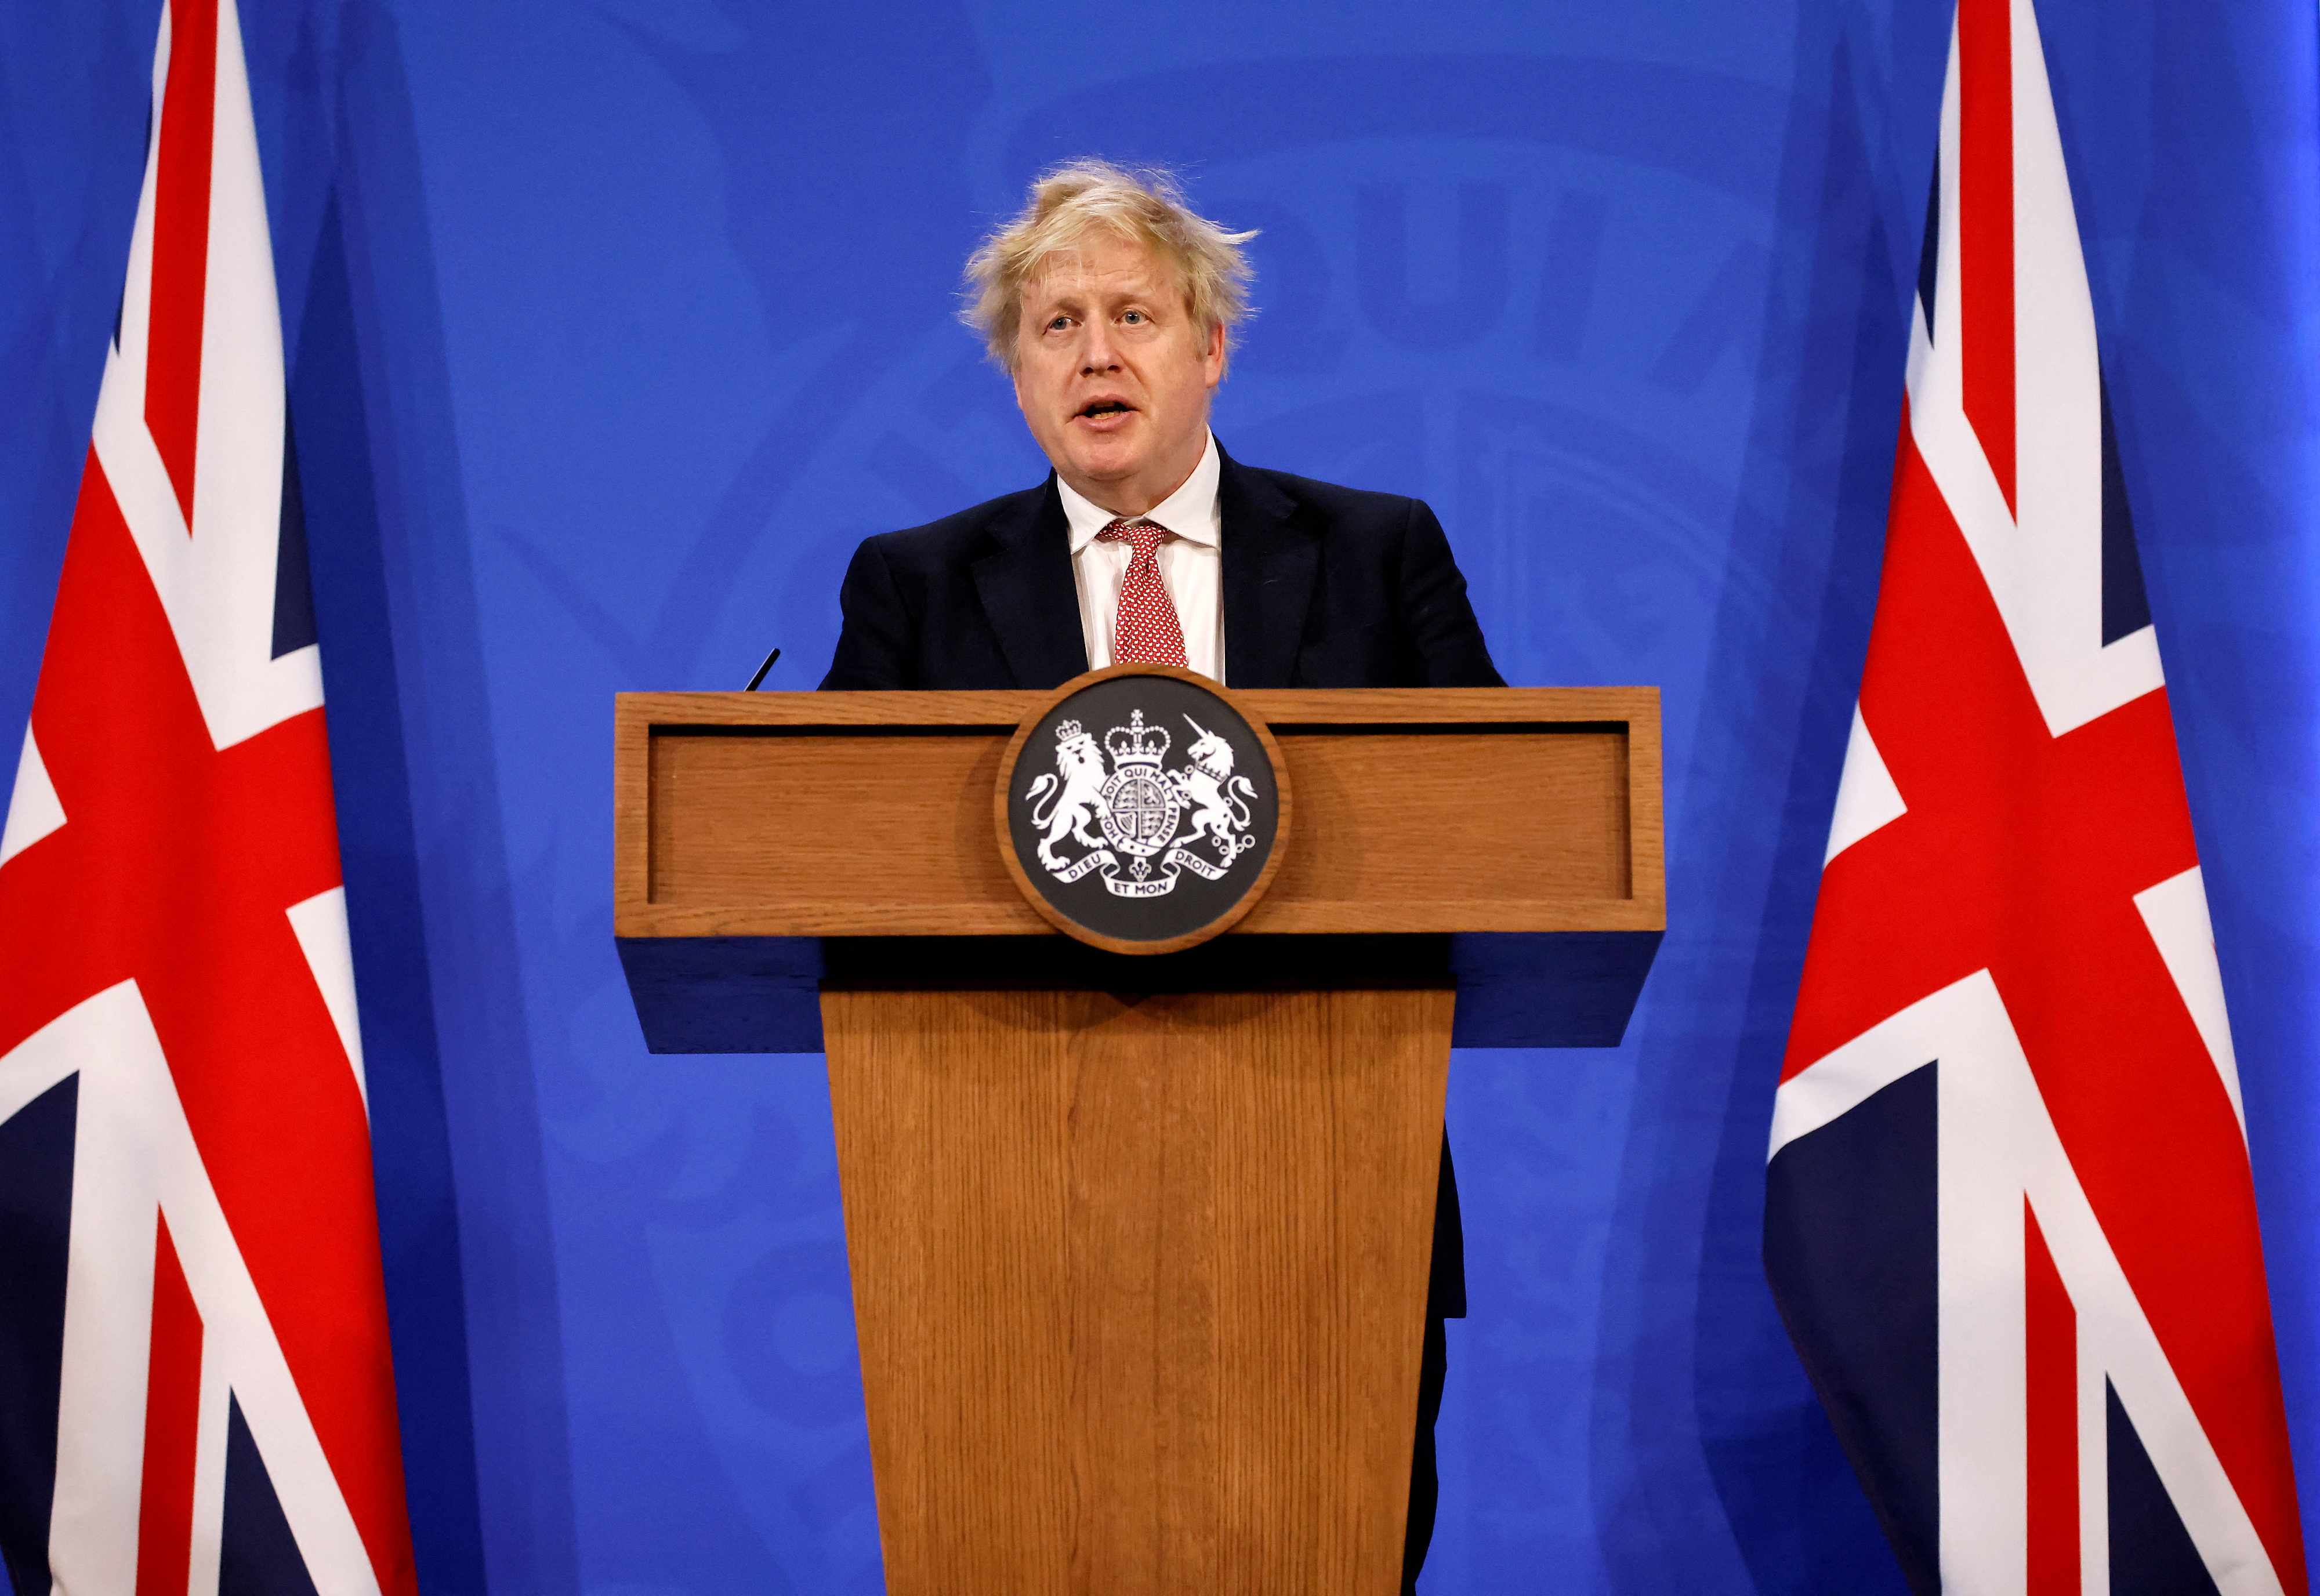 British PM Johnson outlines government's COVID-19 plan in London